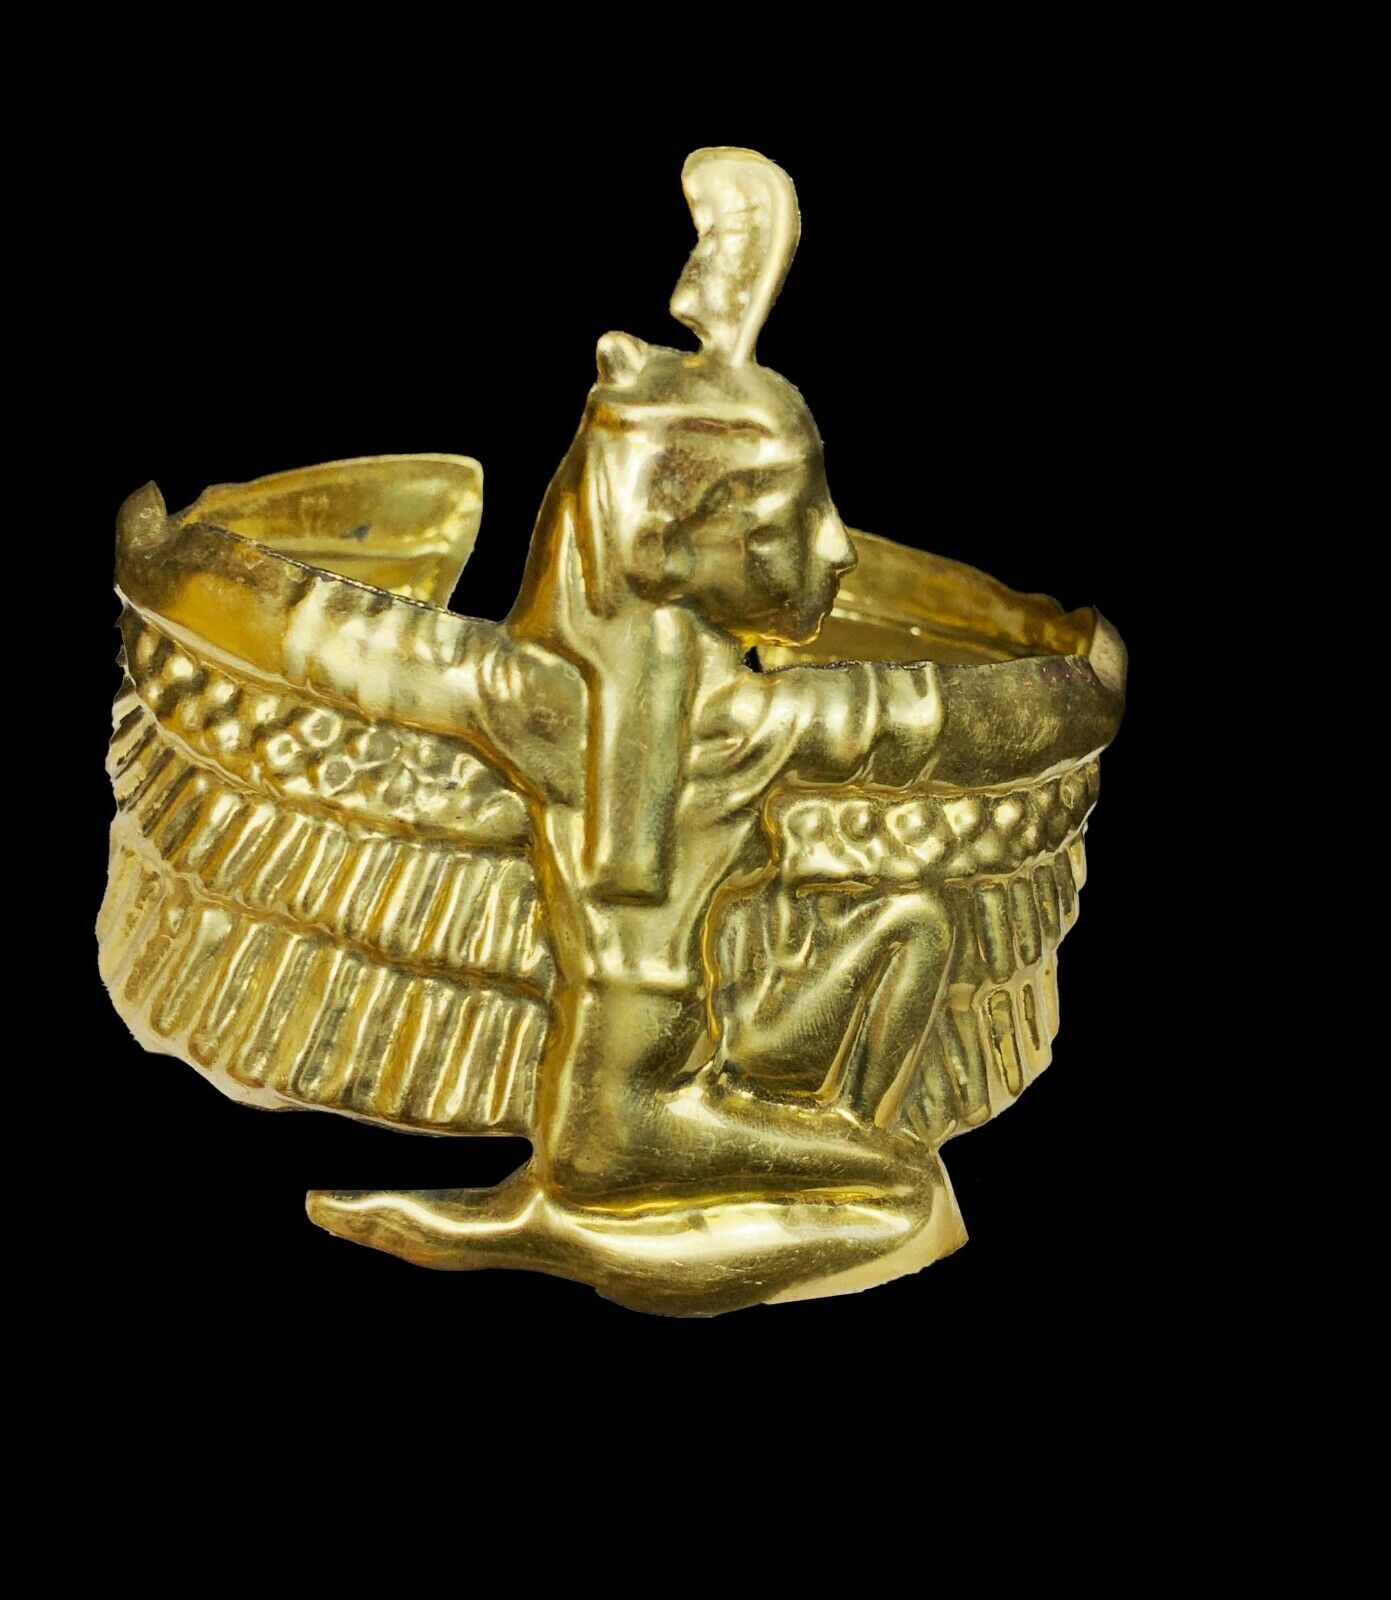 Rare Handmade Egyptian arm cuff of Maat the goddess of justice & truth